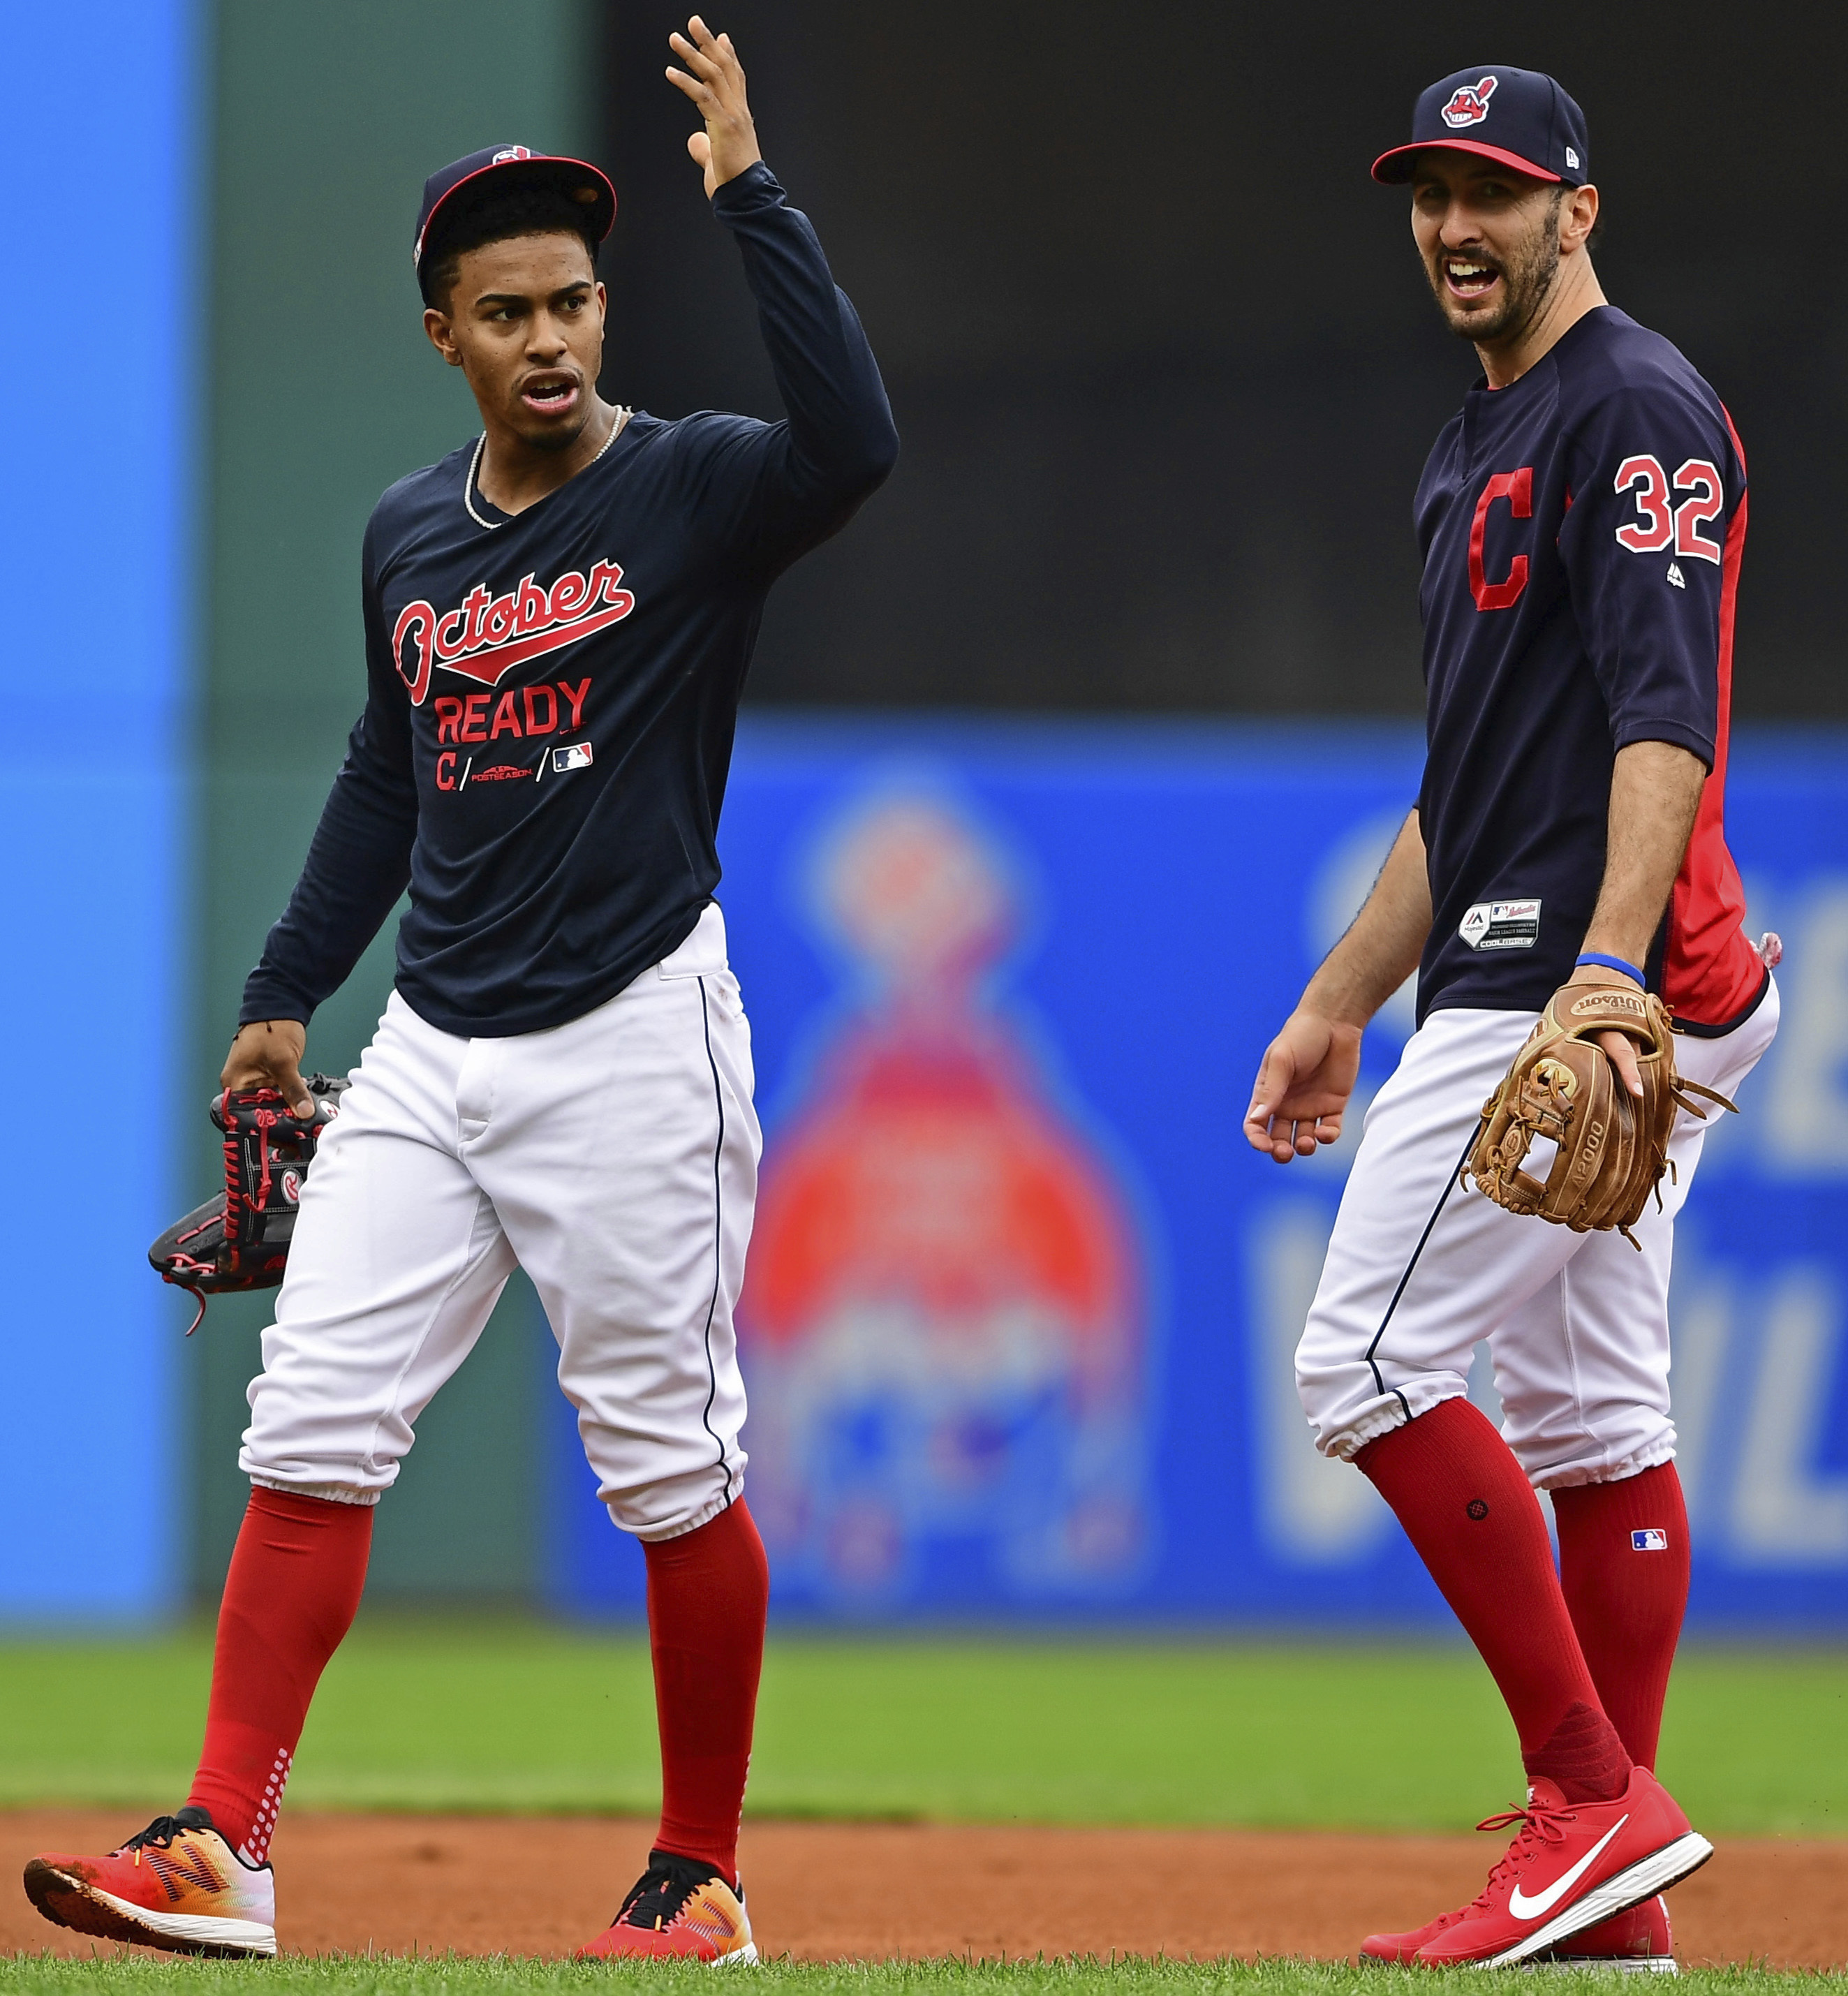 Francisco Lindor has some of the most swag in the game